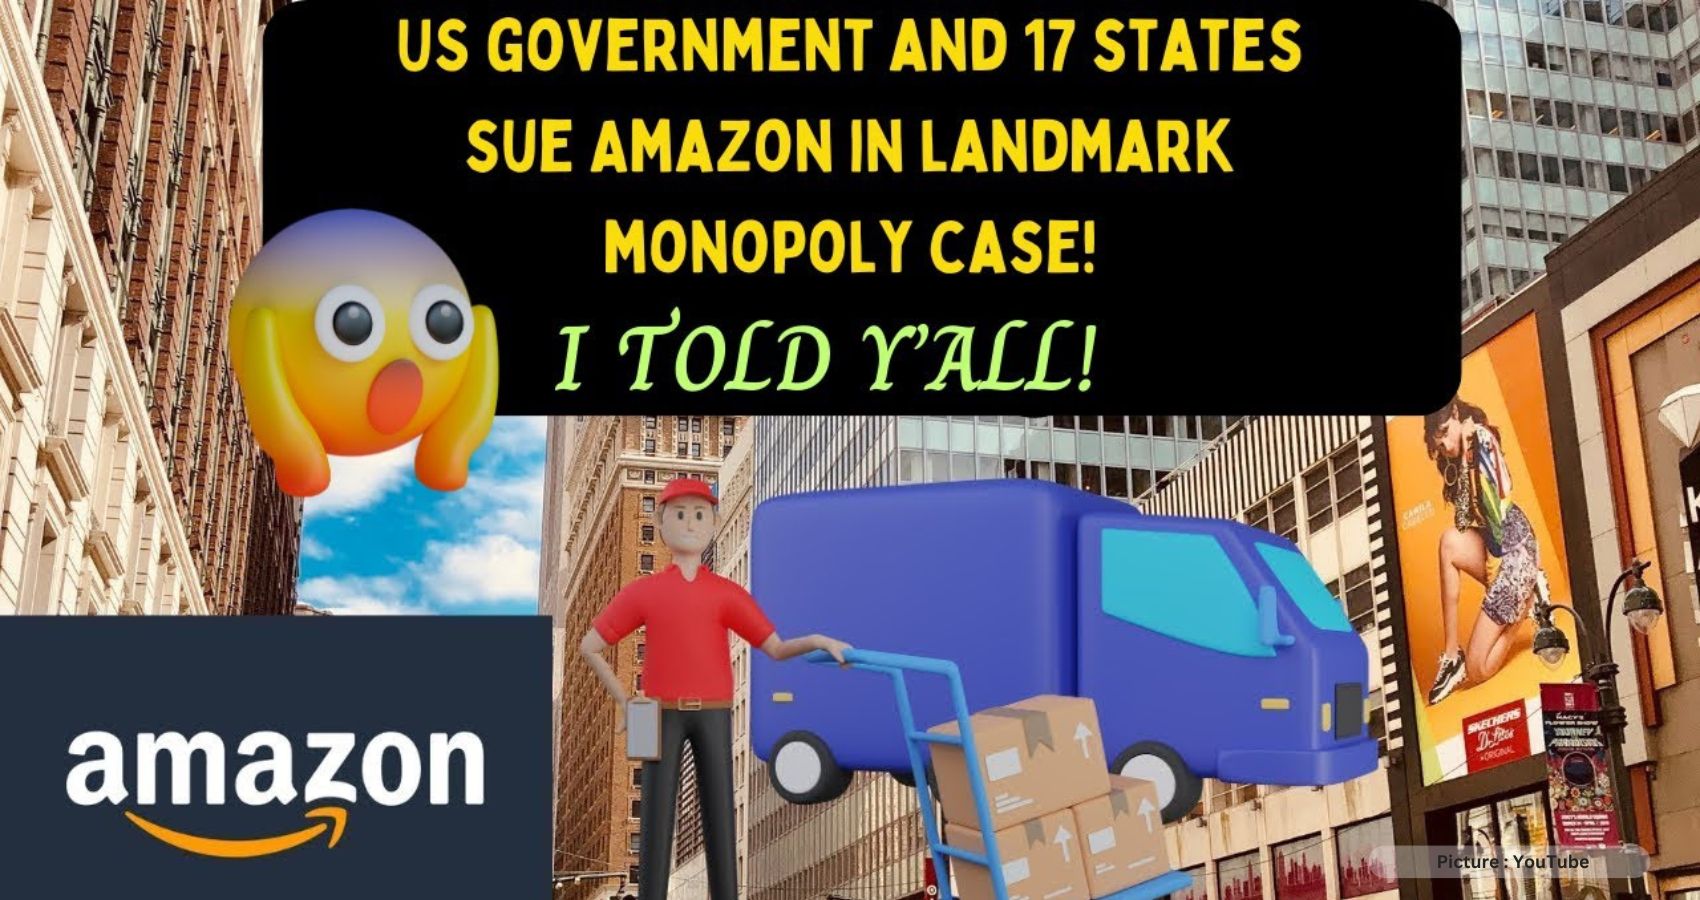 US Government And 17 States Sue Amazon In Landmark Monopoly Case